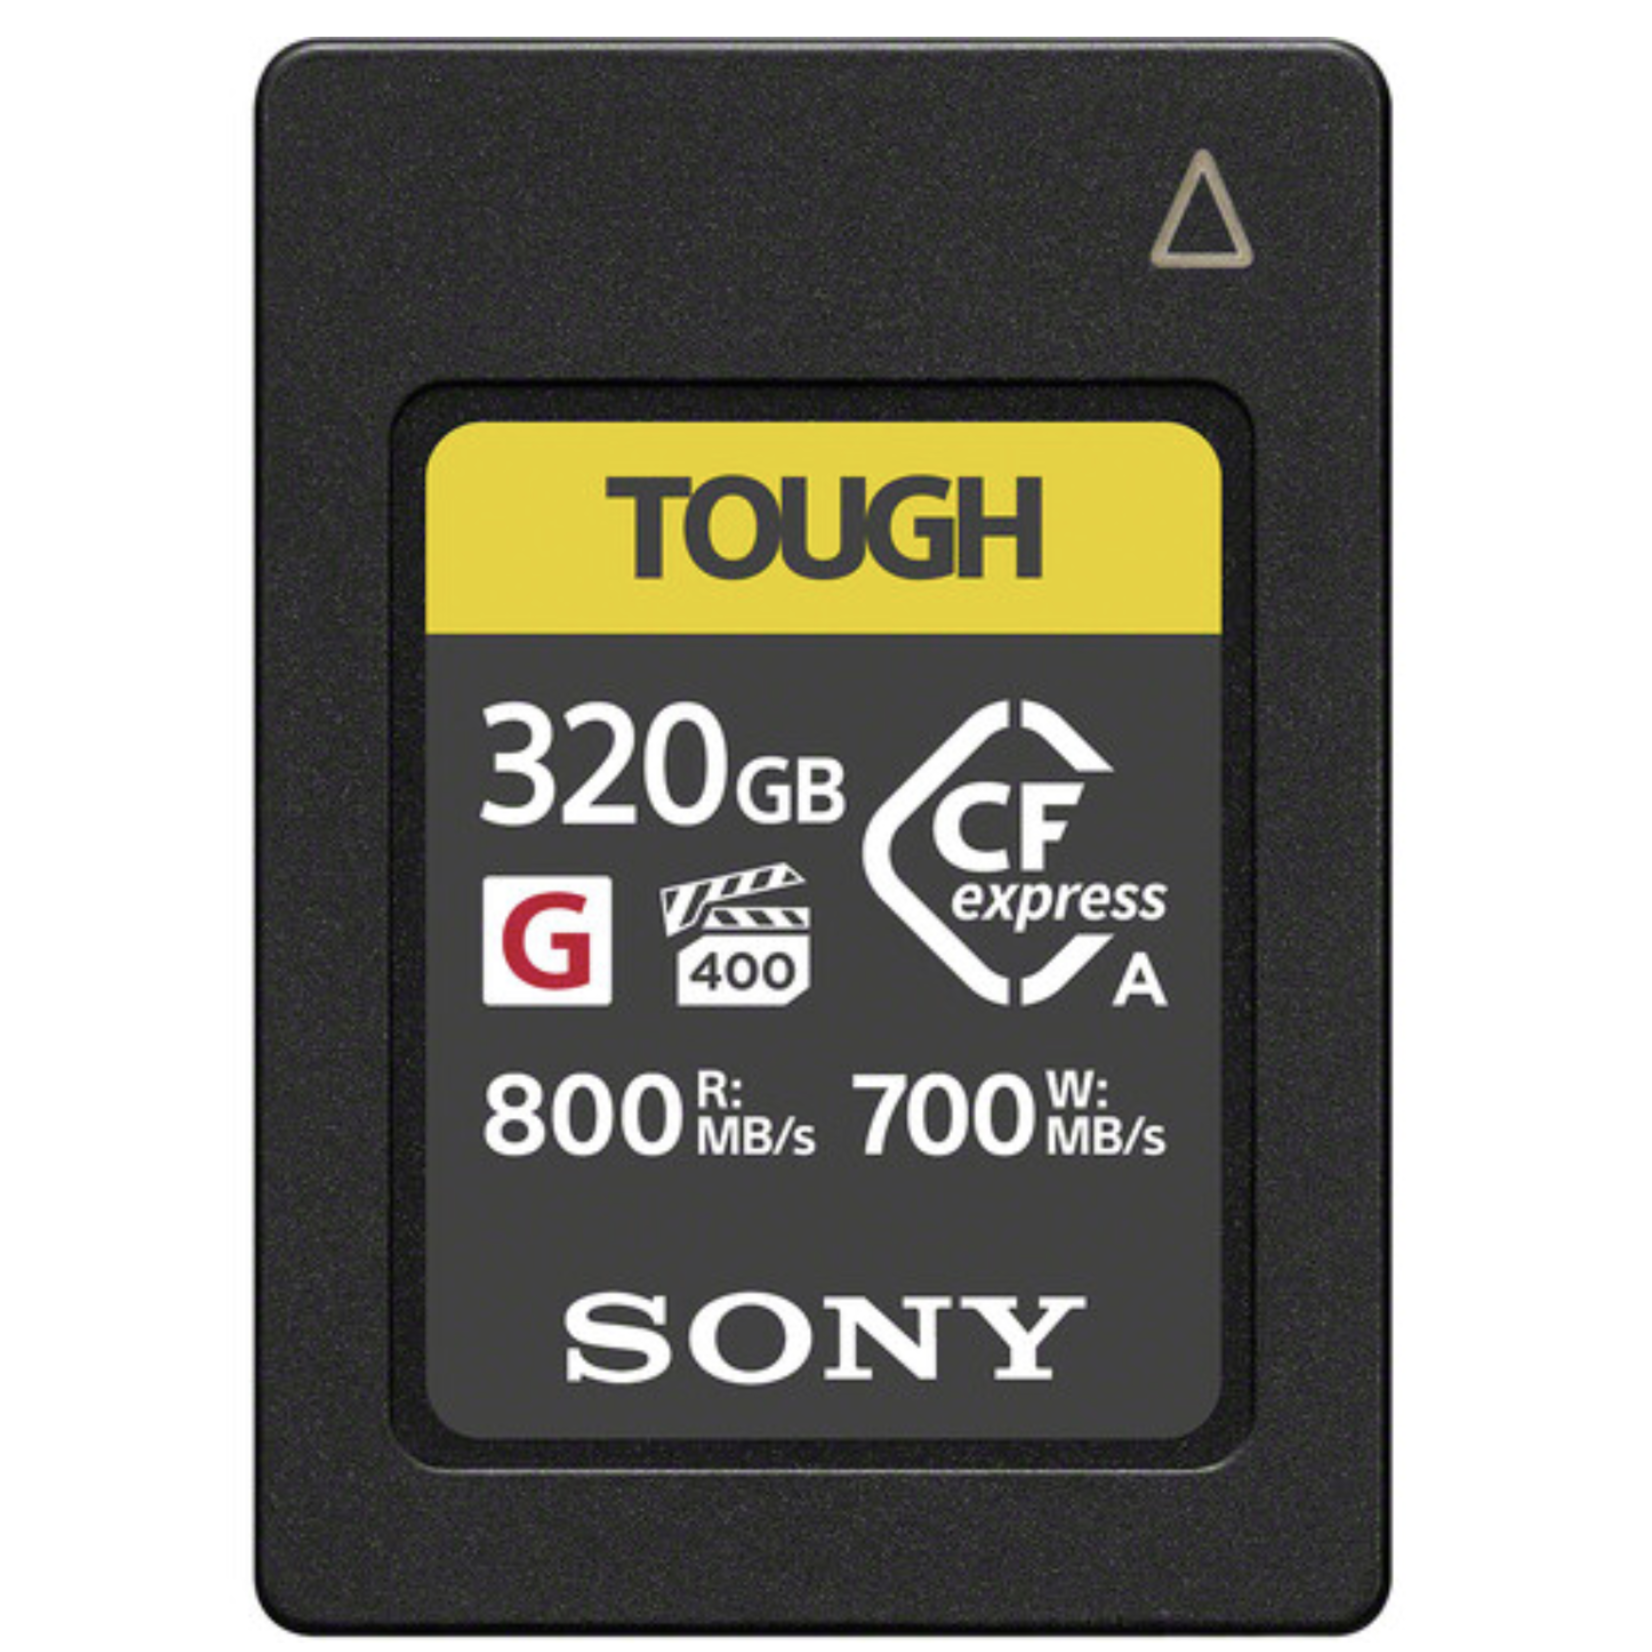 Sony Sony 320GB CFexpress Type A TOUGH Memory Card